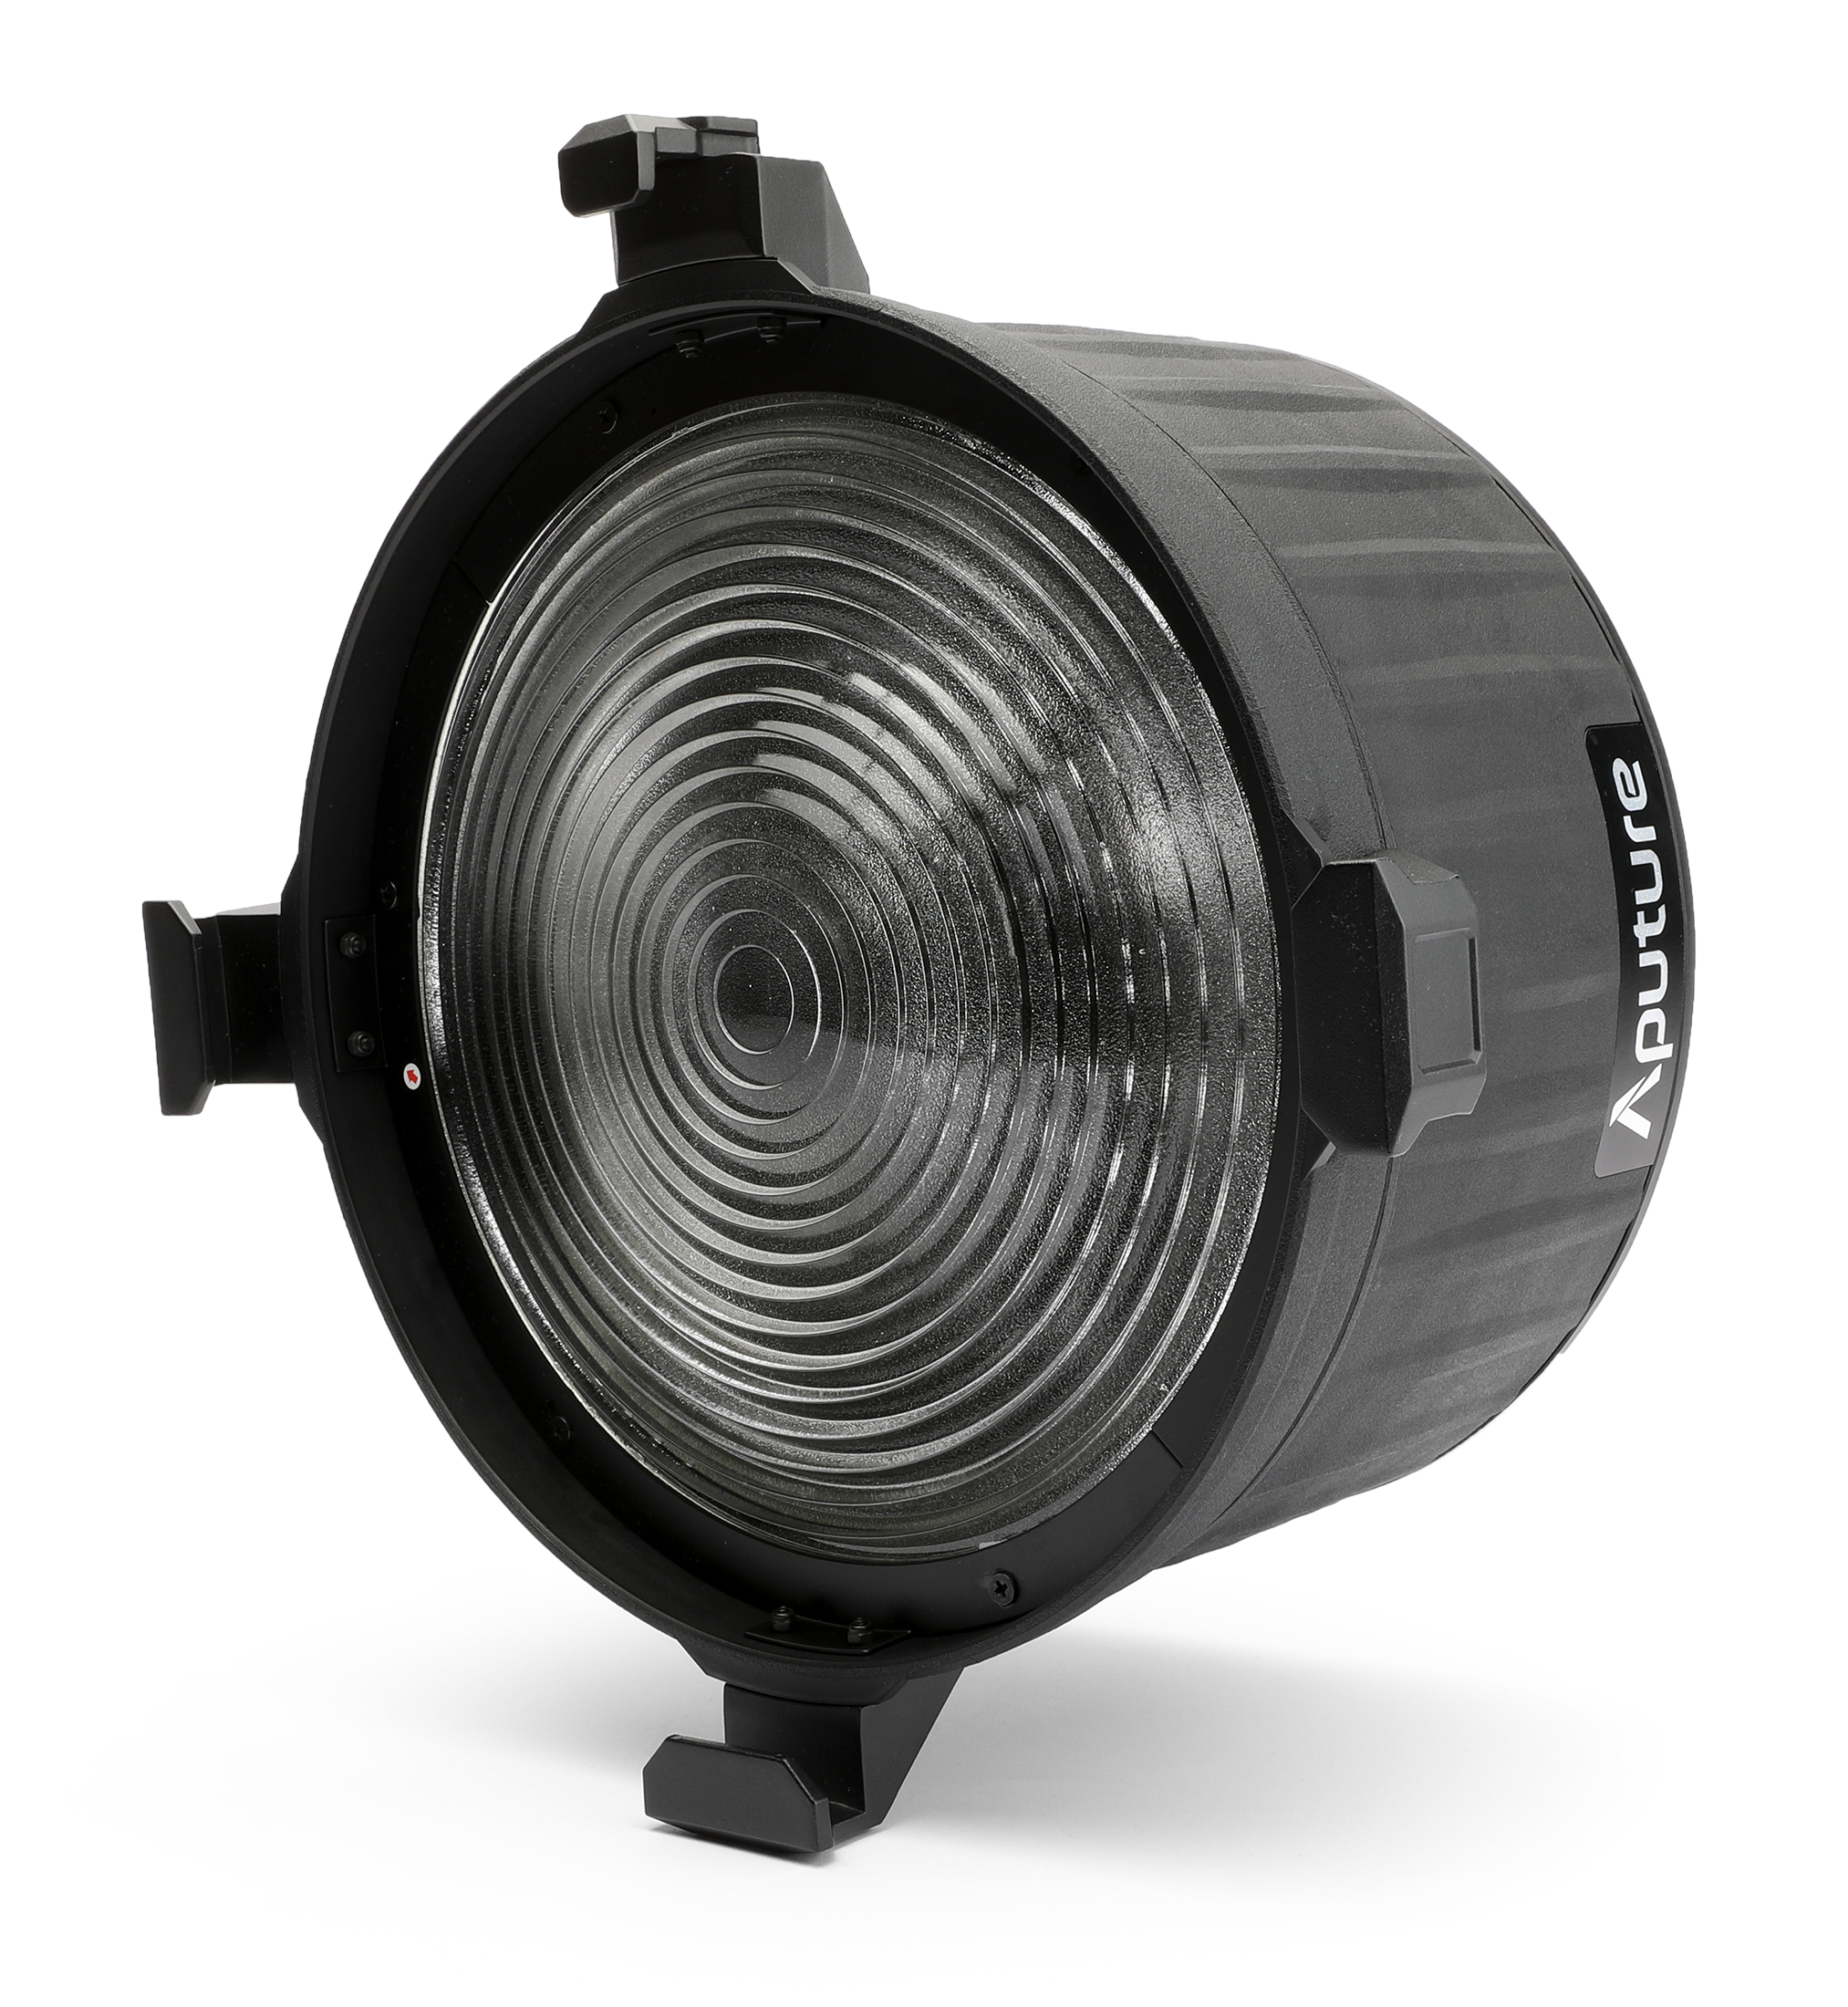 Camera Rental Centre - Singapore - The Aputure F10 Fresnel + Barndoor is  now available as a choice of light modifier for the Aputure 600D Pro!